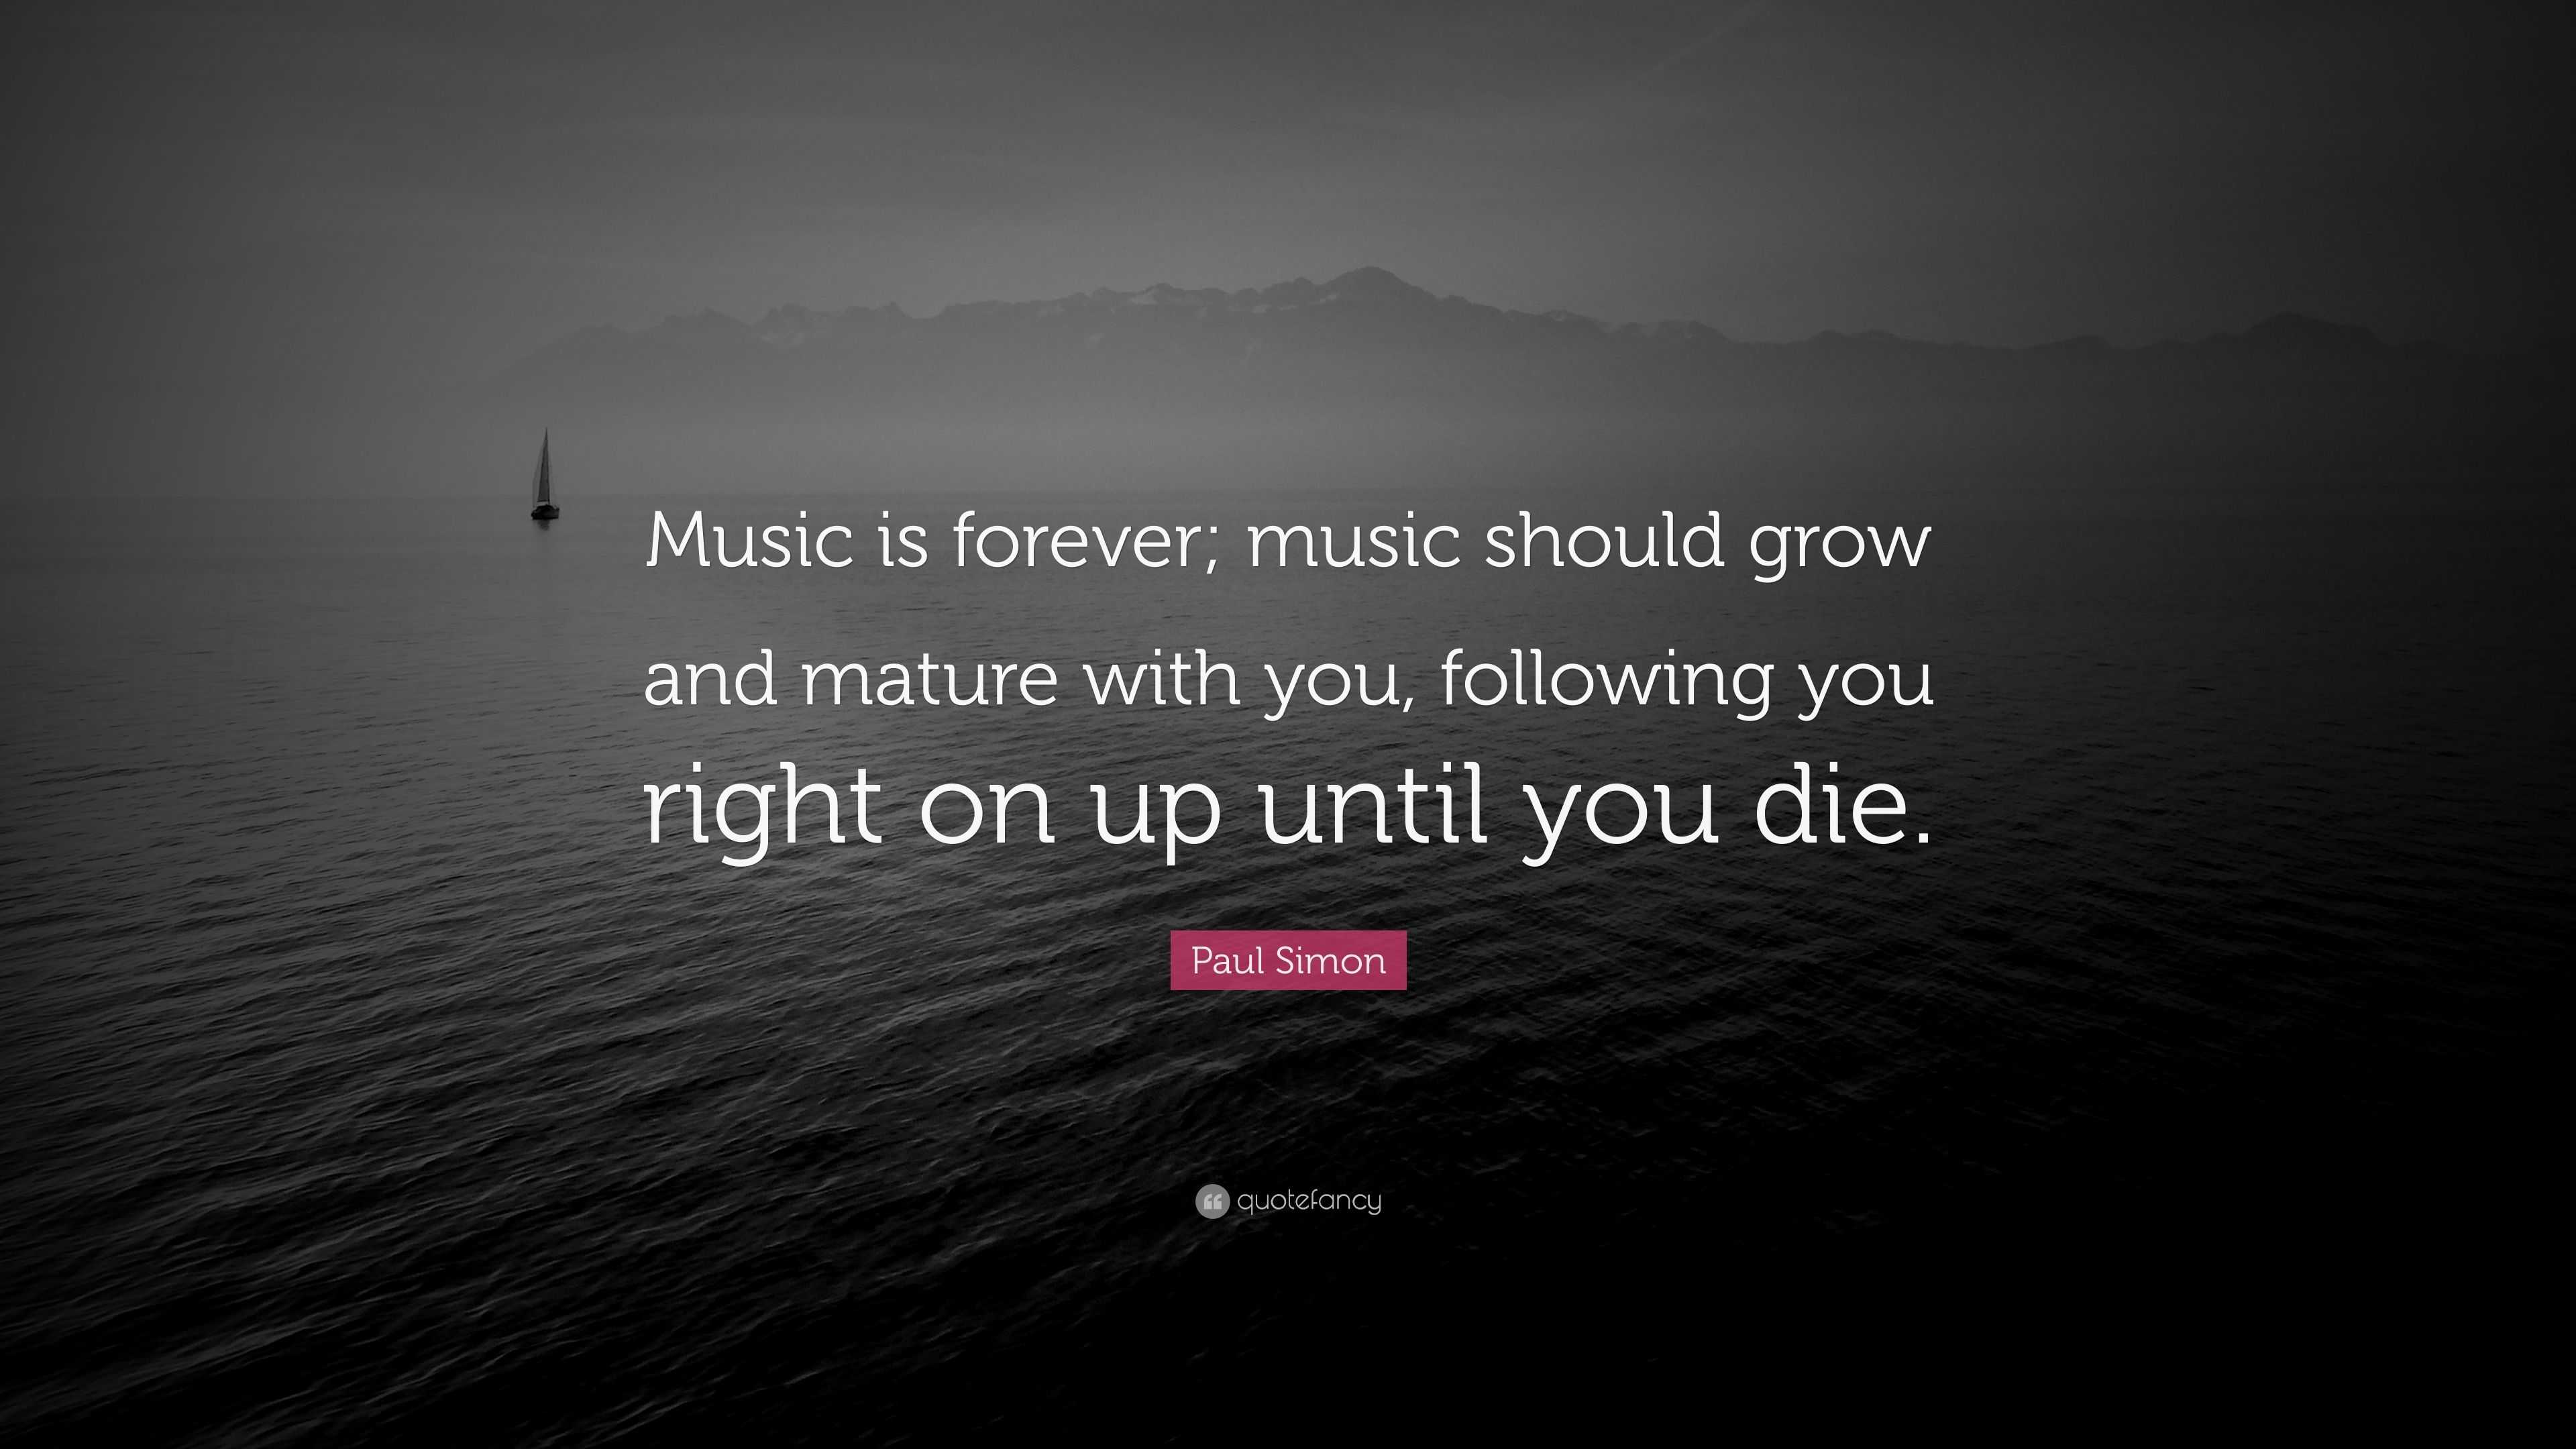 Paul Simon Quote: “Music is forever; music should grow and mature with ...